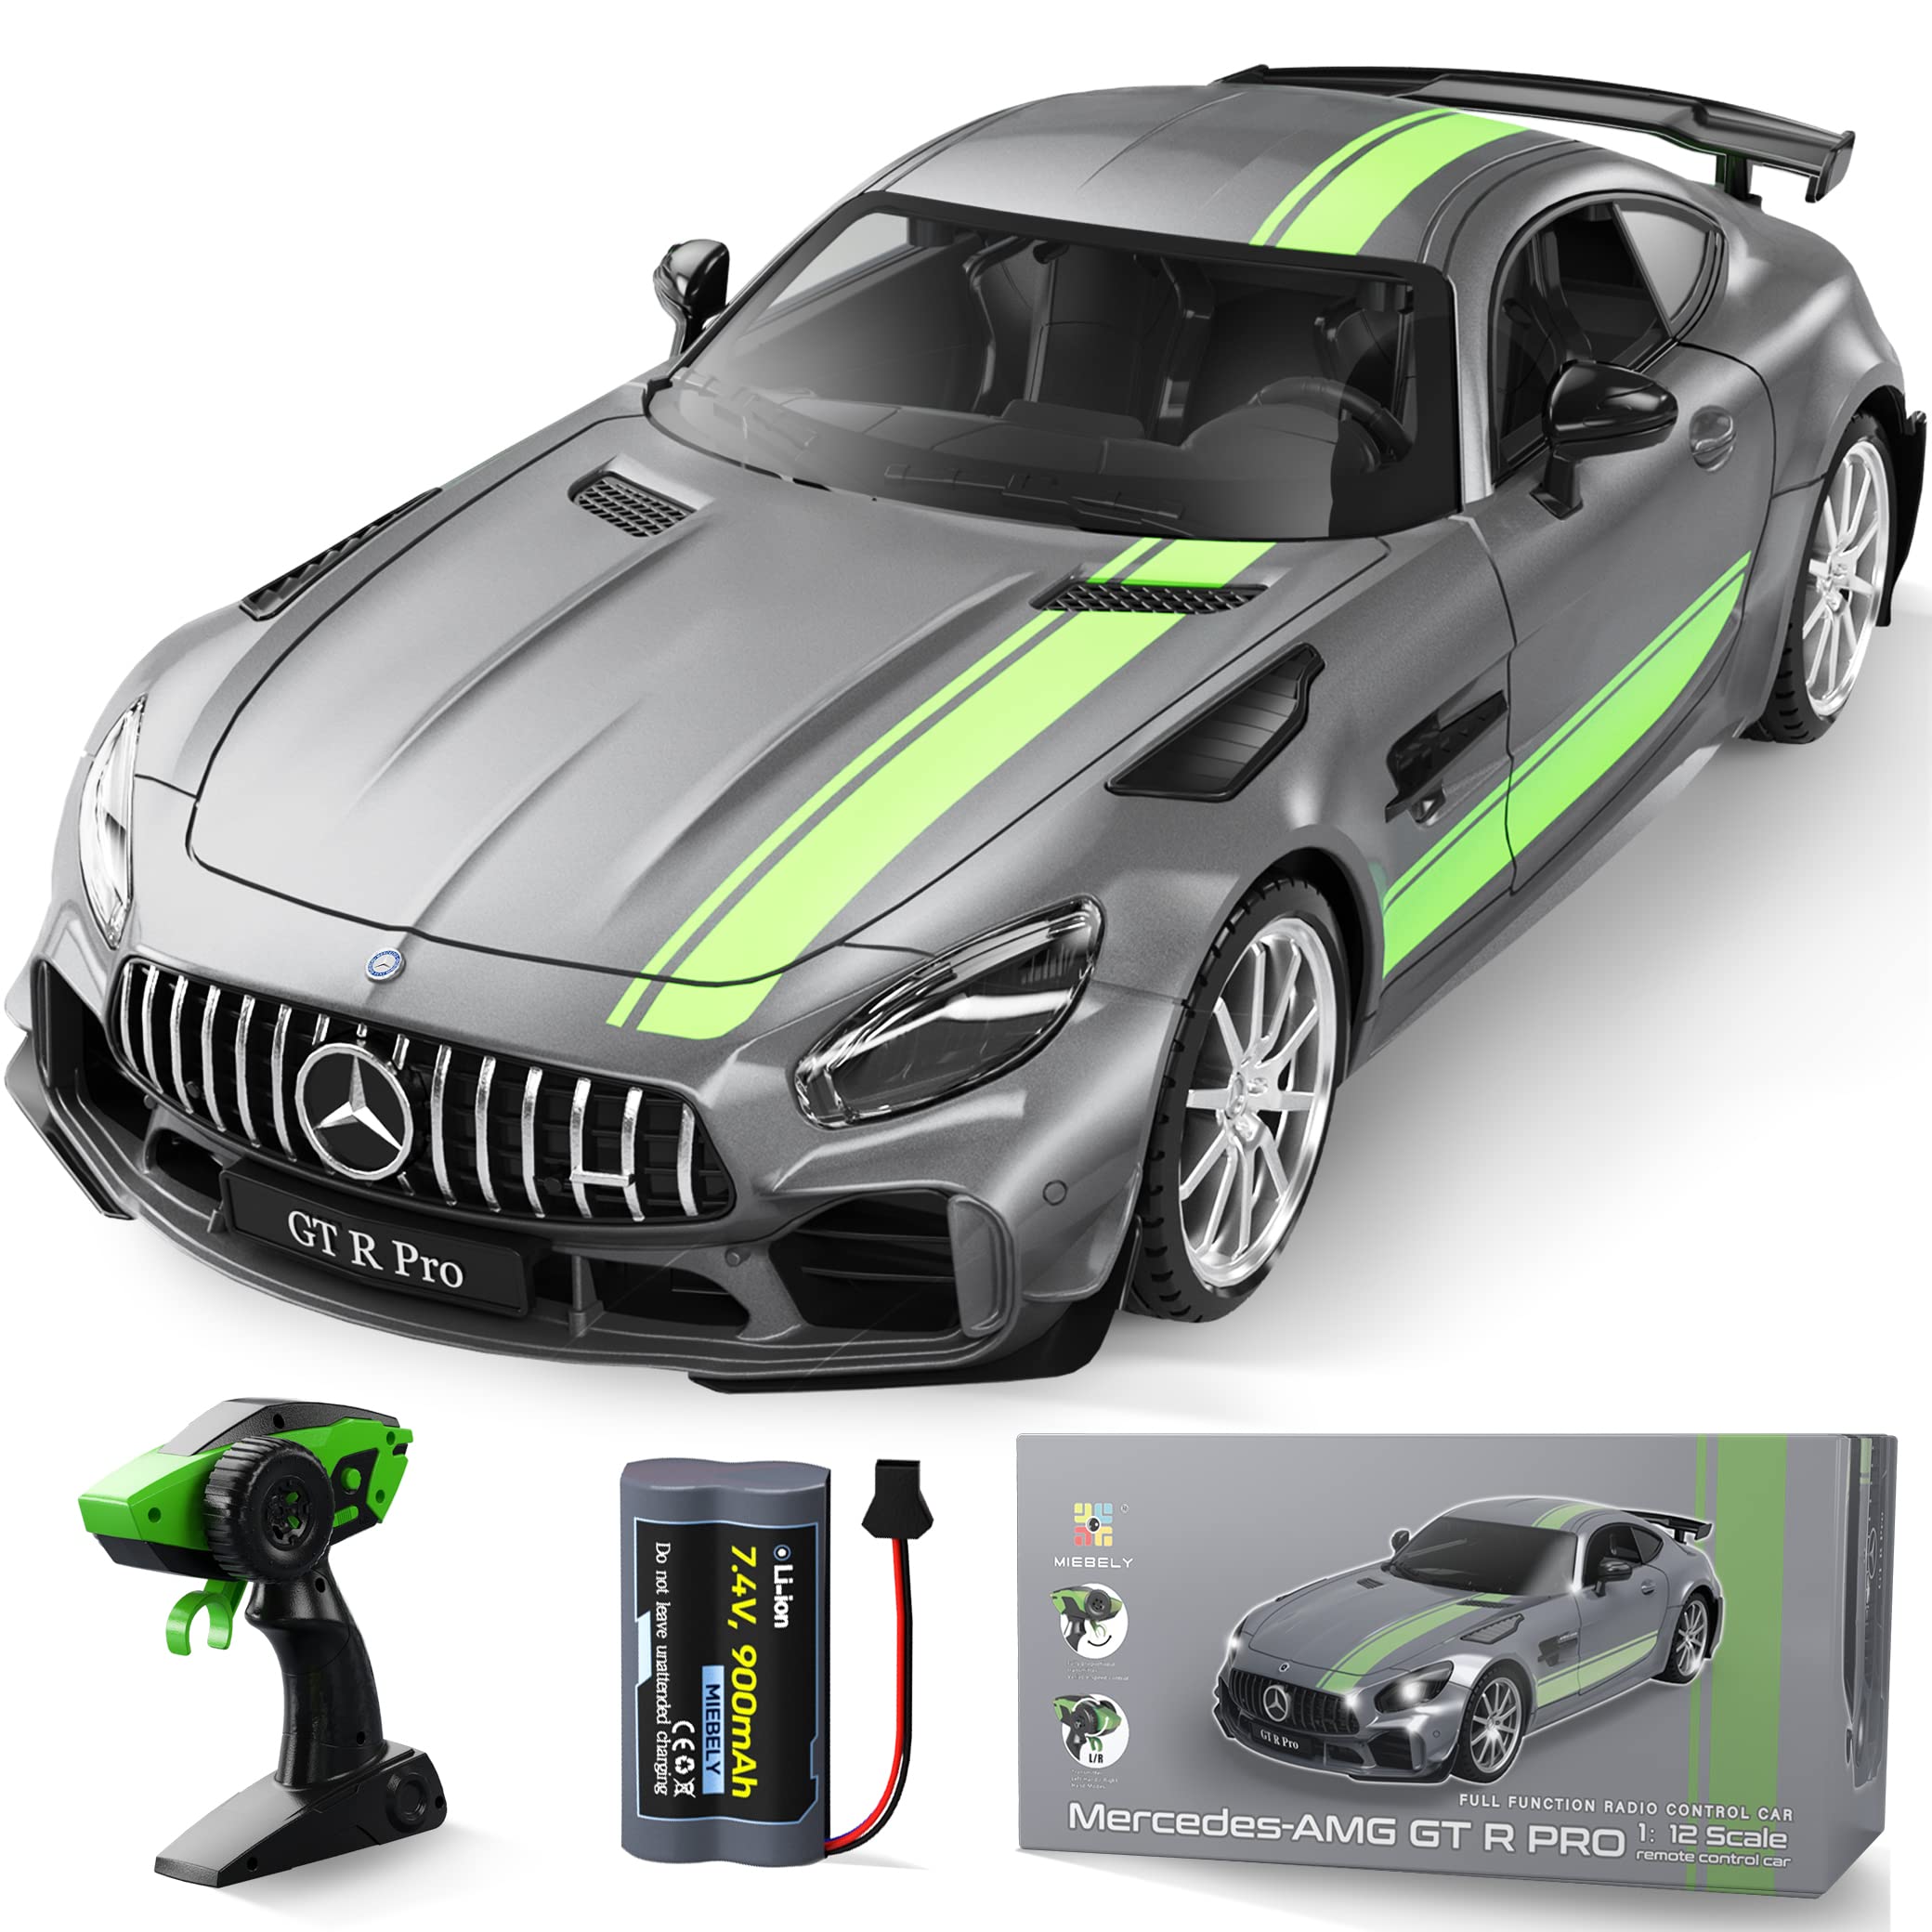 MIEBELY Remote control car, Mercedes Benz 112 Scale Official authorized gT R Pro Rc cars 74V 900mAh Rechargeable Battery 24ghz R